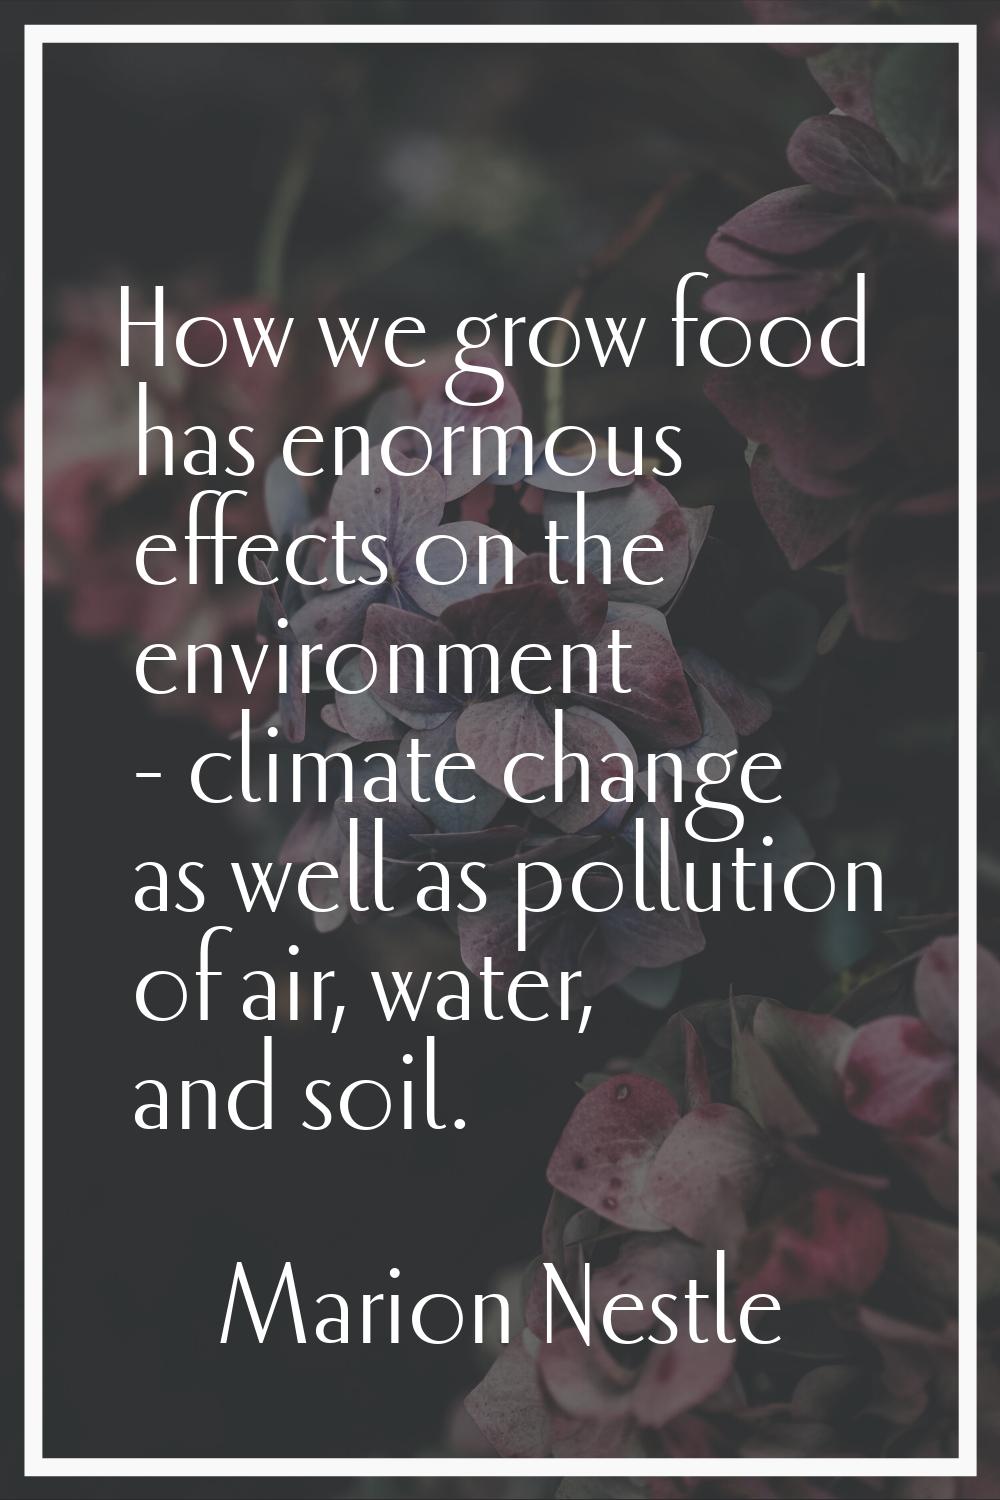 How we grow food has enormous effects on the environment - climate change as well as pollution of a